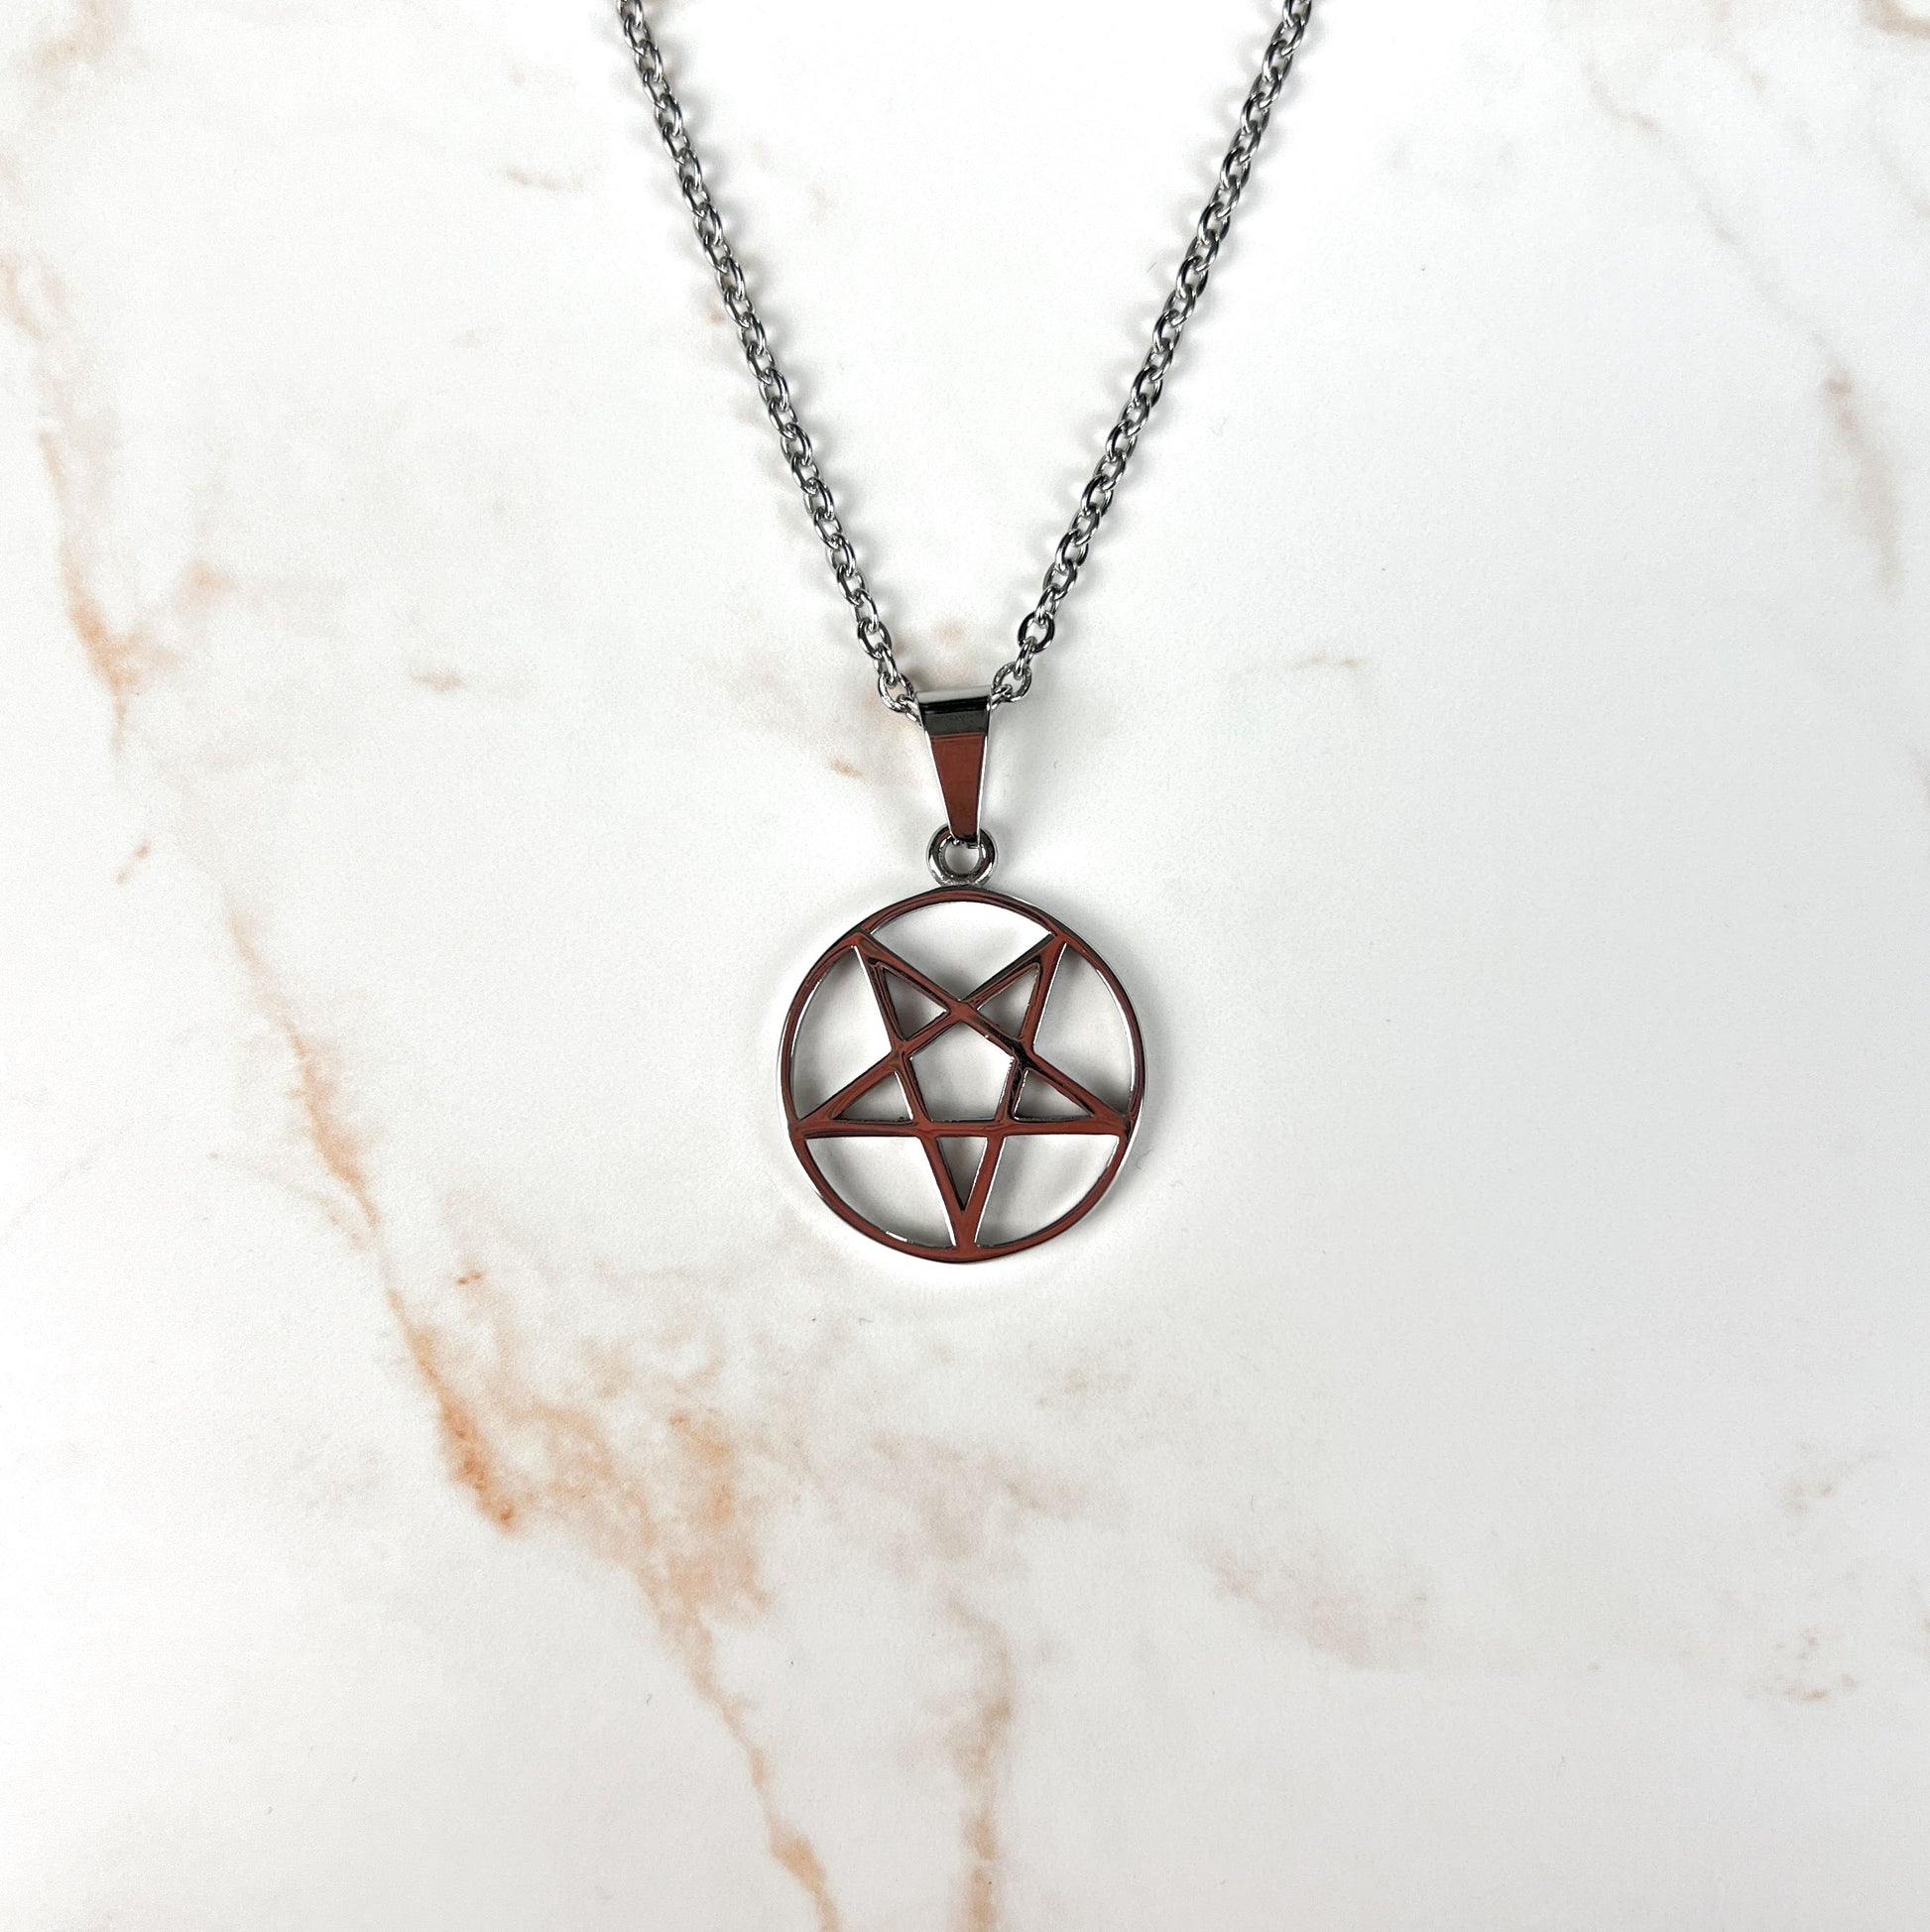 Stainless steel reversed pentacle necklace Baguette Magick